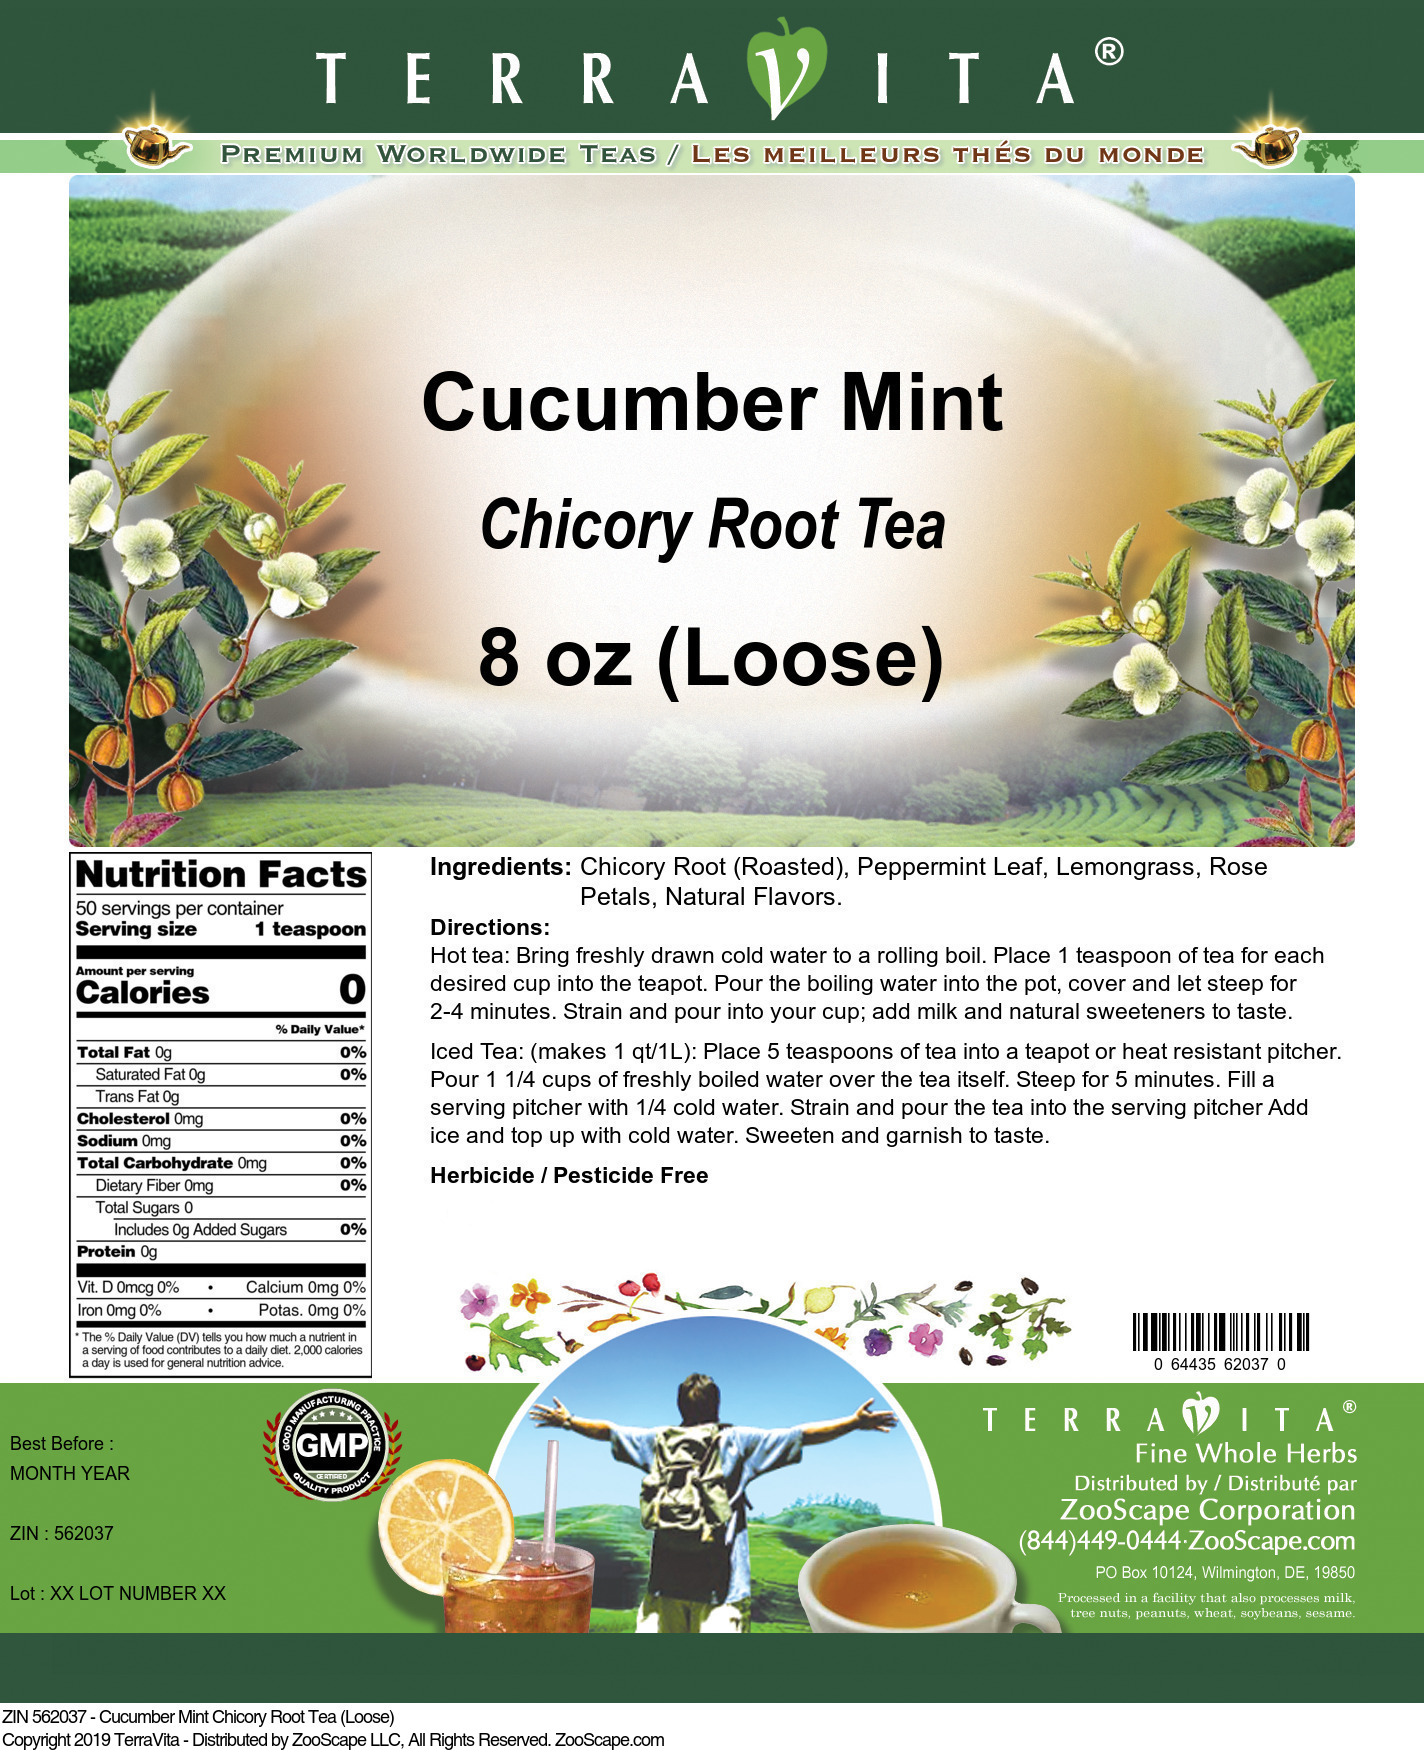 Cucumber Mint Chicory Root Tea (Loose) - Label